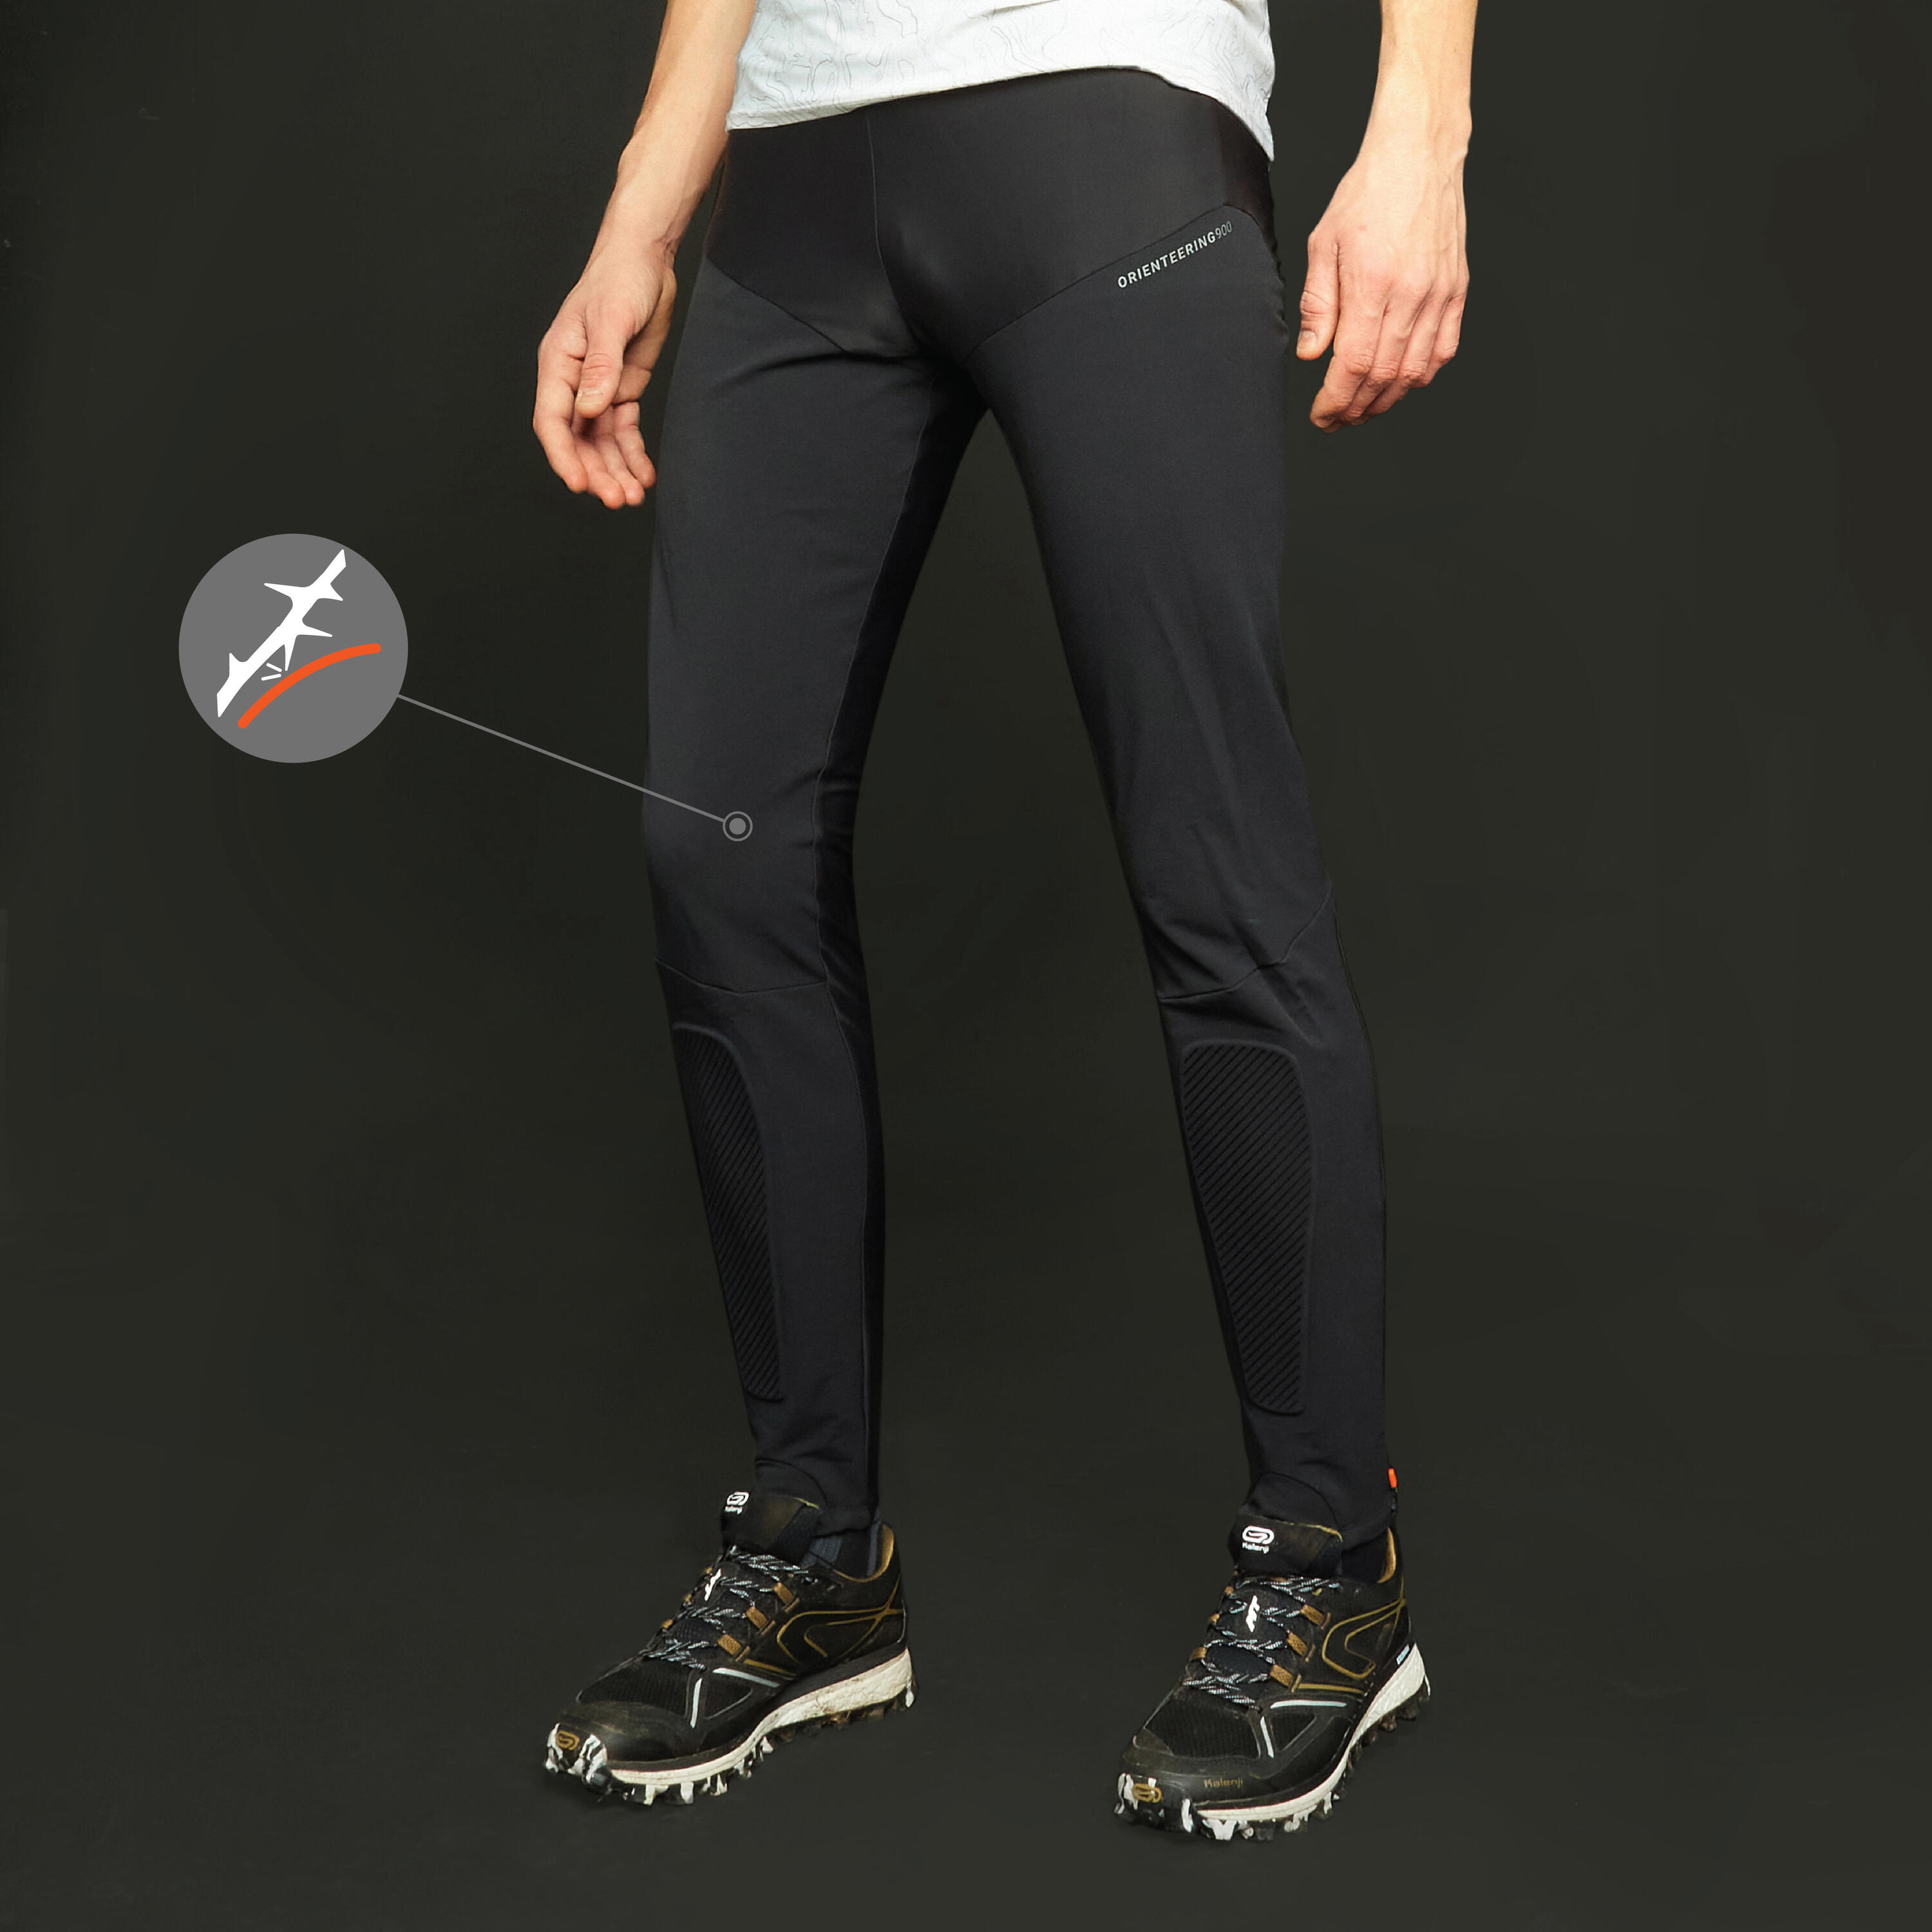 UNISEX PROTECTIVE AND RESISTANT 900 LONG RUNNING TIGHTS FOR ORIENTEERING 2/13